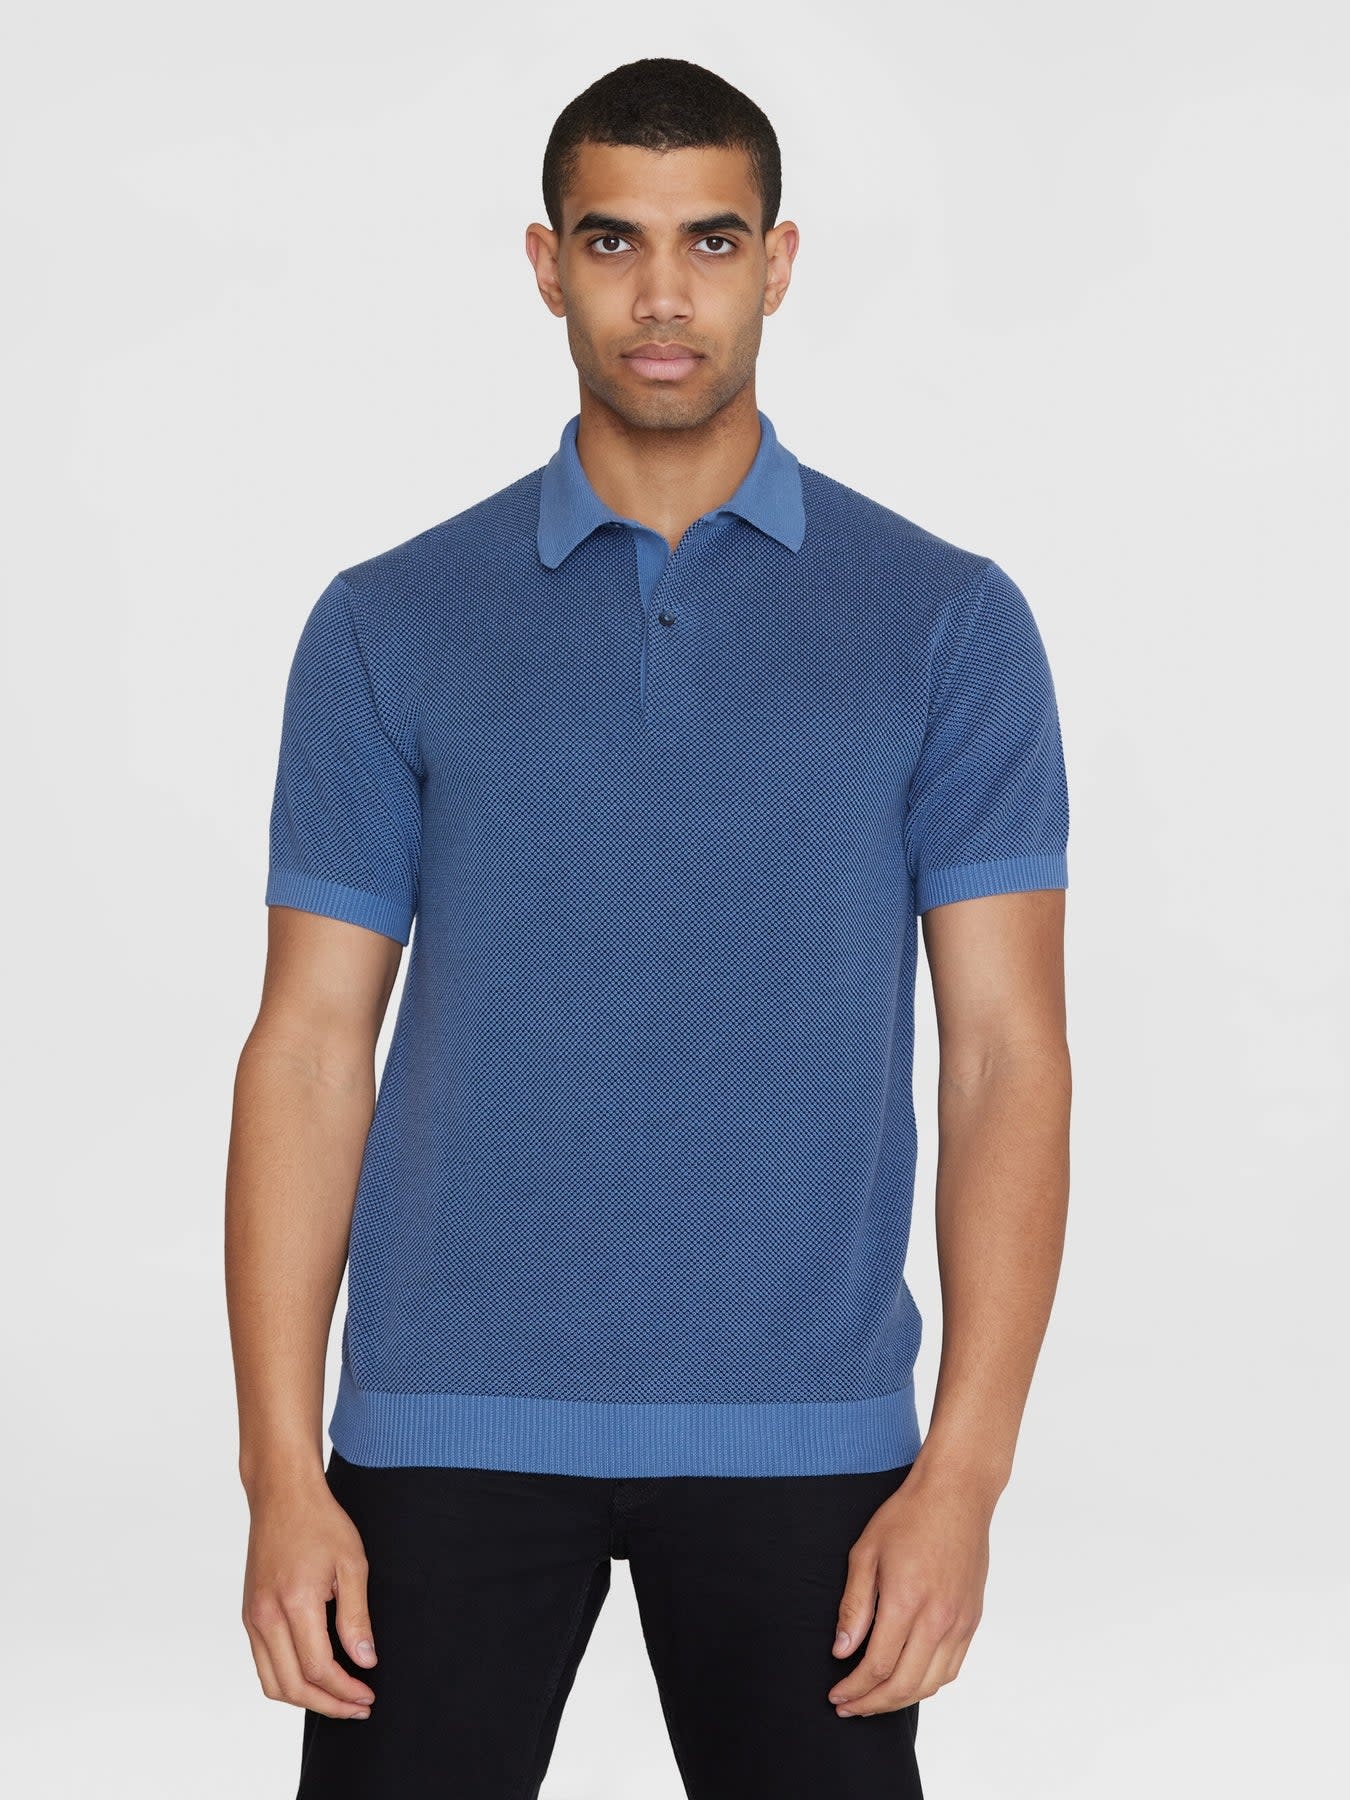 KnowledgeCotton Apparel KnowledgeCotton, Two Tone Polo, moonlight blue, S